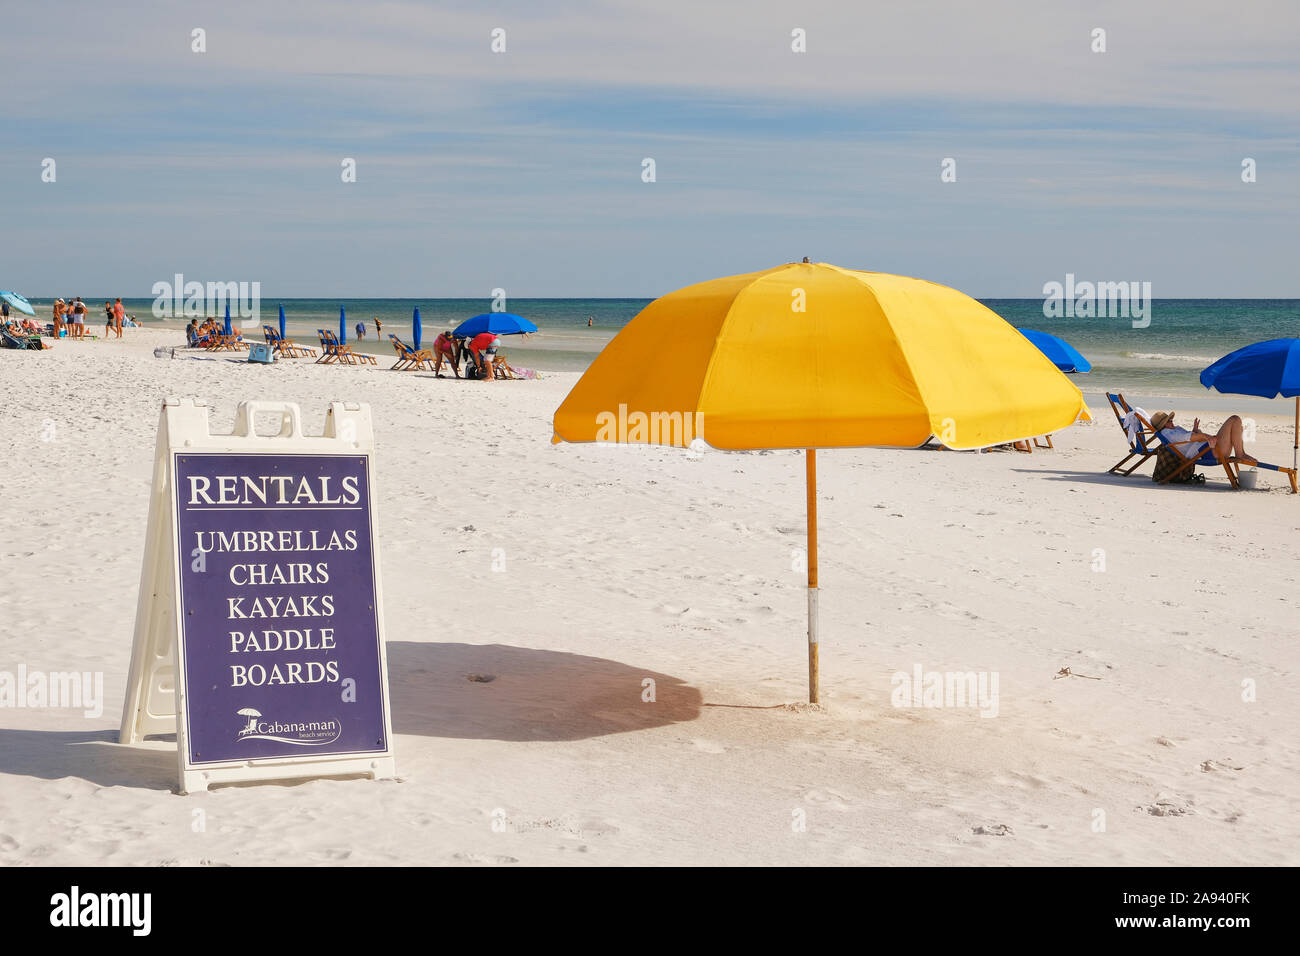 Yellow beach umbrella and sign for rental beach chairs, umbrellas, kayaks and paddle boards in Seaside Florida, USA. Stock Photo